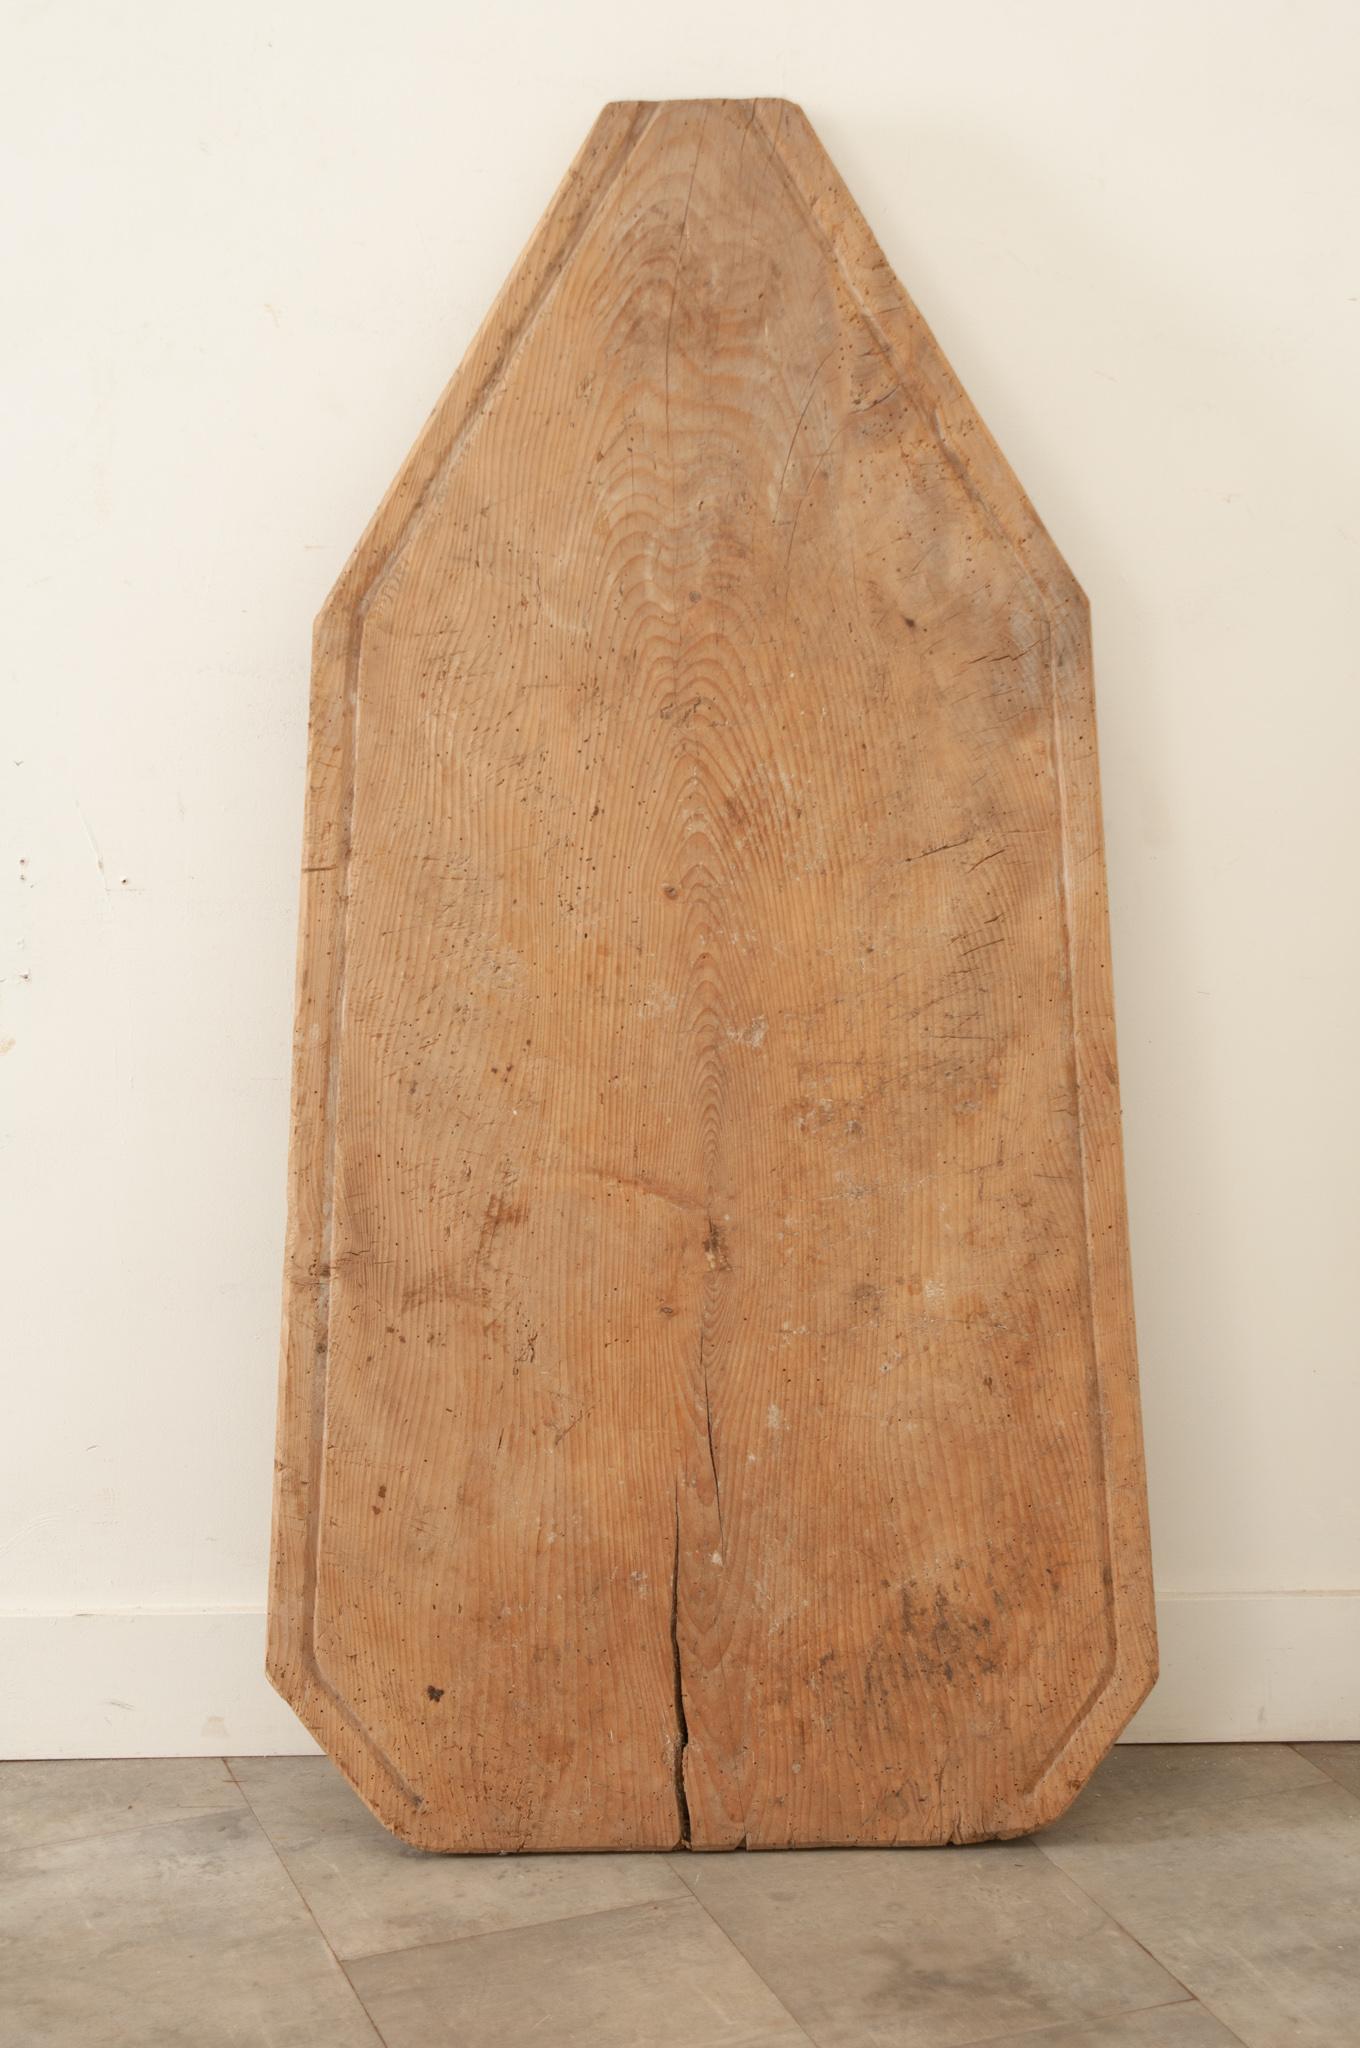 A large early 19th century French cheese draining board, hand-crafted in France circa 1820. This solid pine board with a shallow rim along the edges was used to drain the whey from cheeses as they were processed. Featuring scrapes and markings from